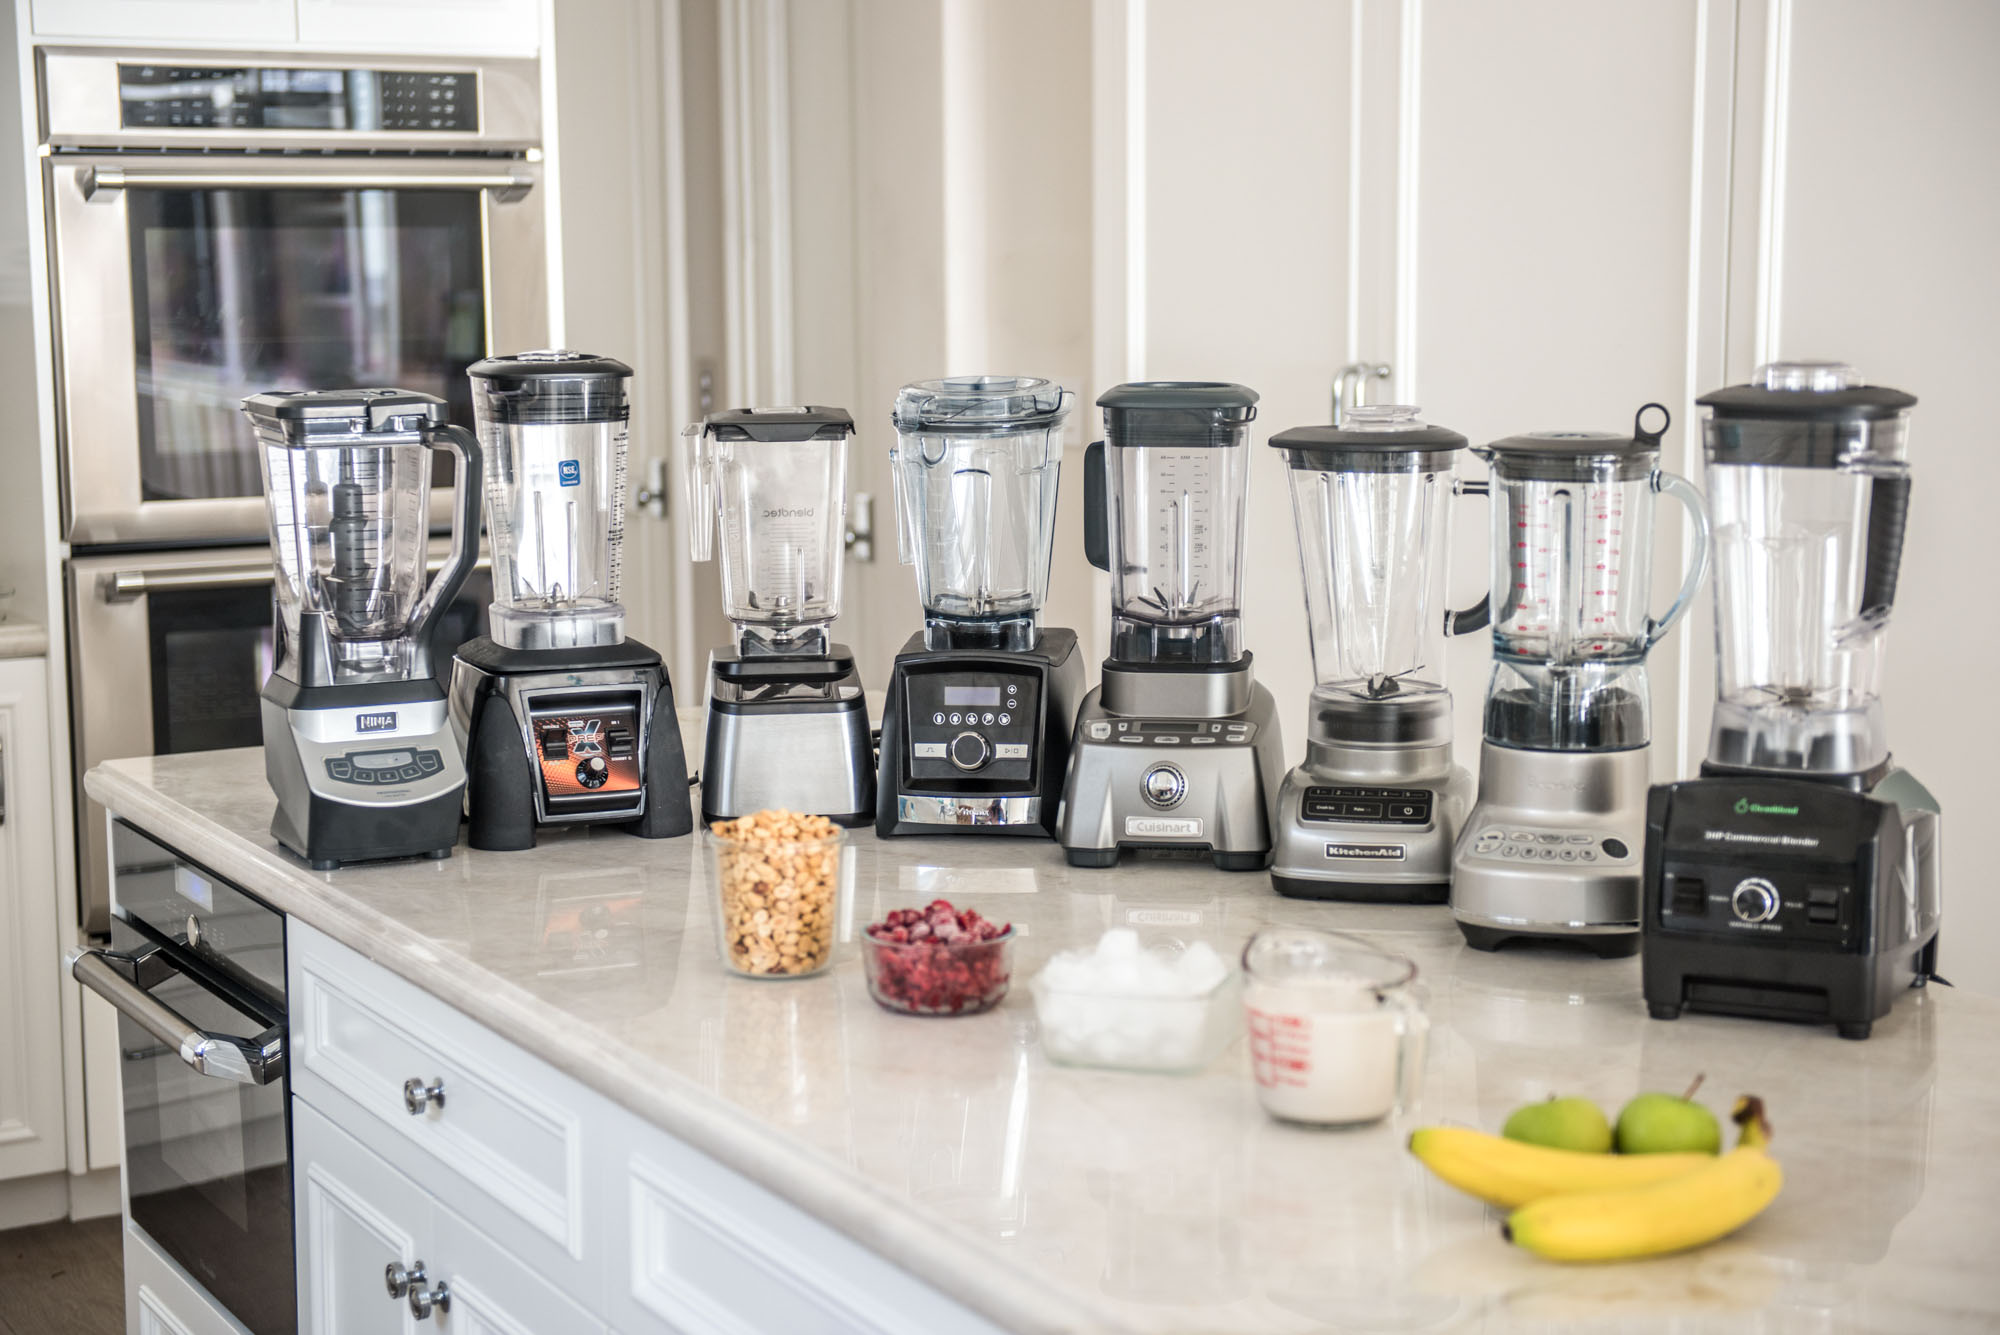 Blenders lined up with ingredients on a counter.